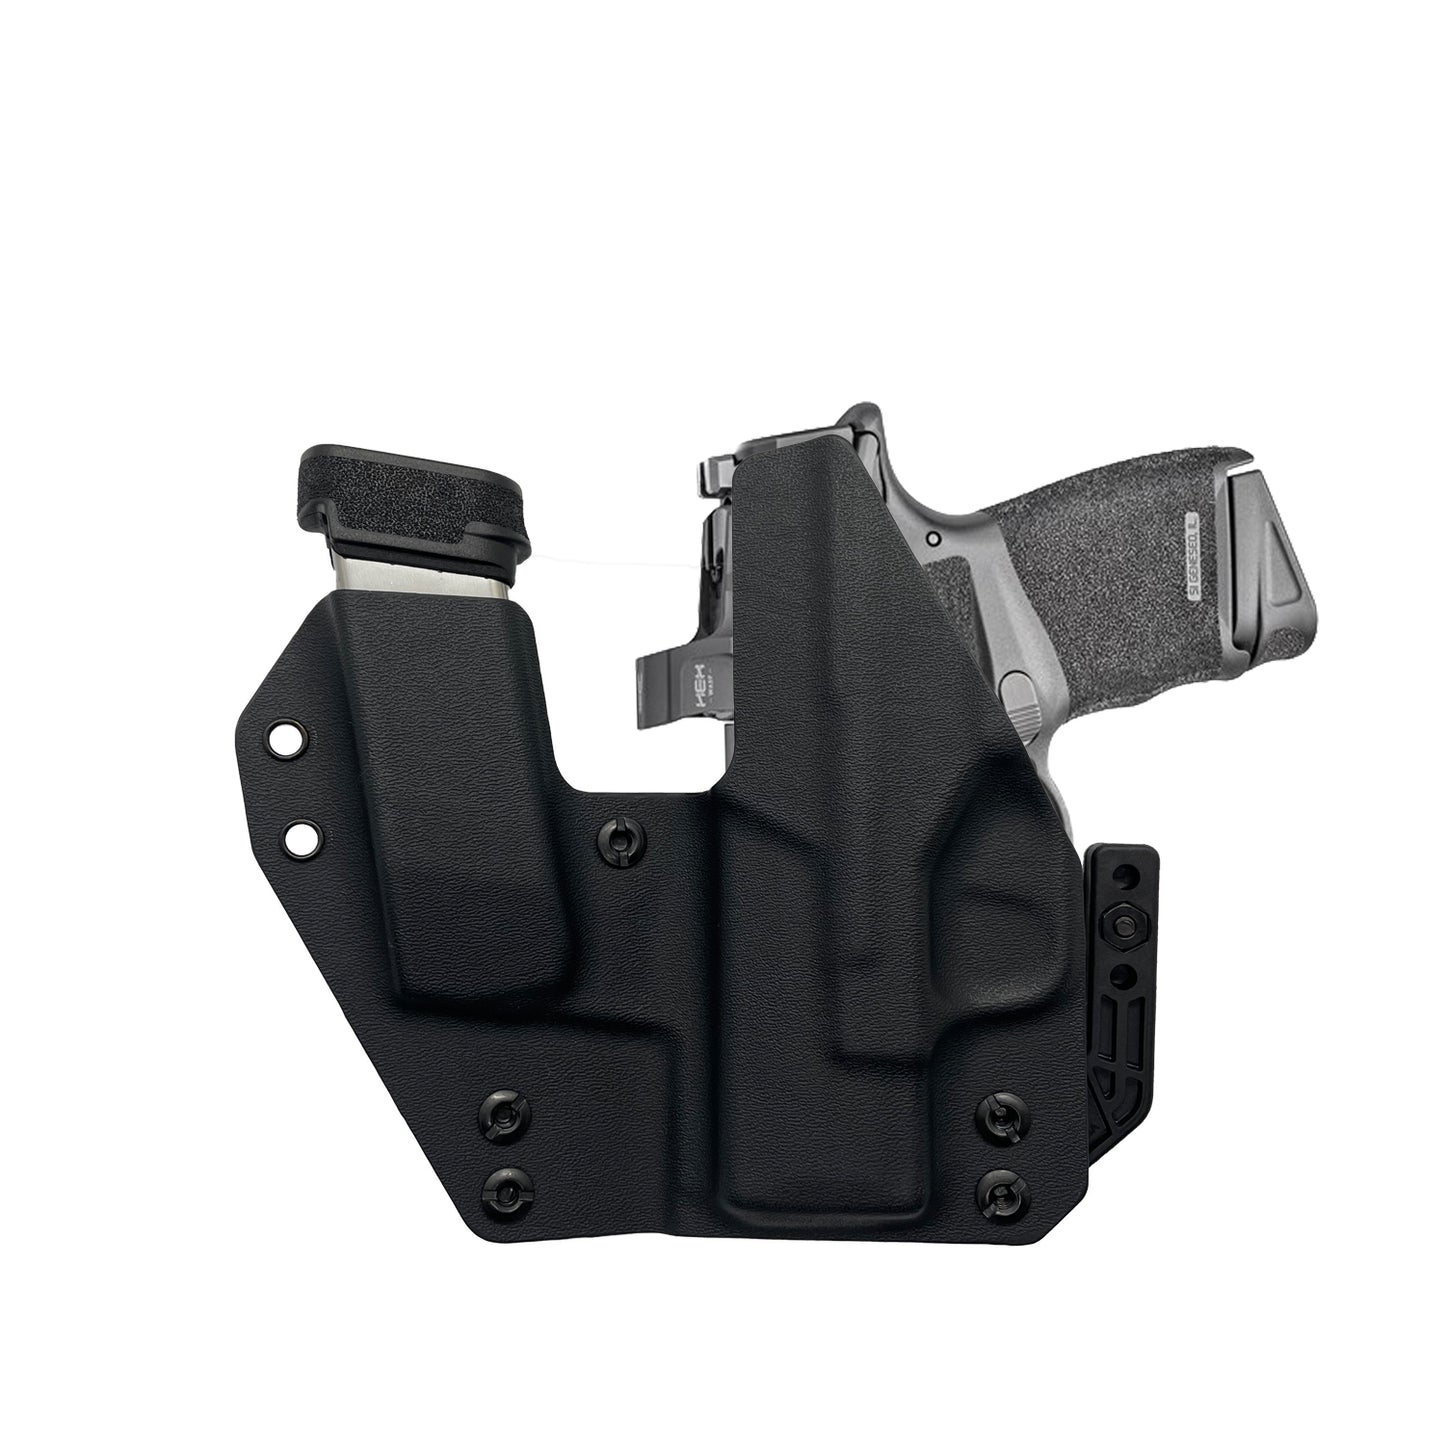 SIG P365 With TLR6 Light RMR Cut Gun and Magazine Combo Holster